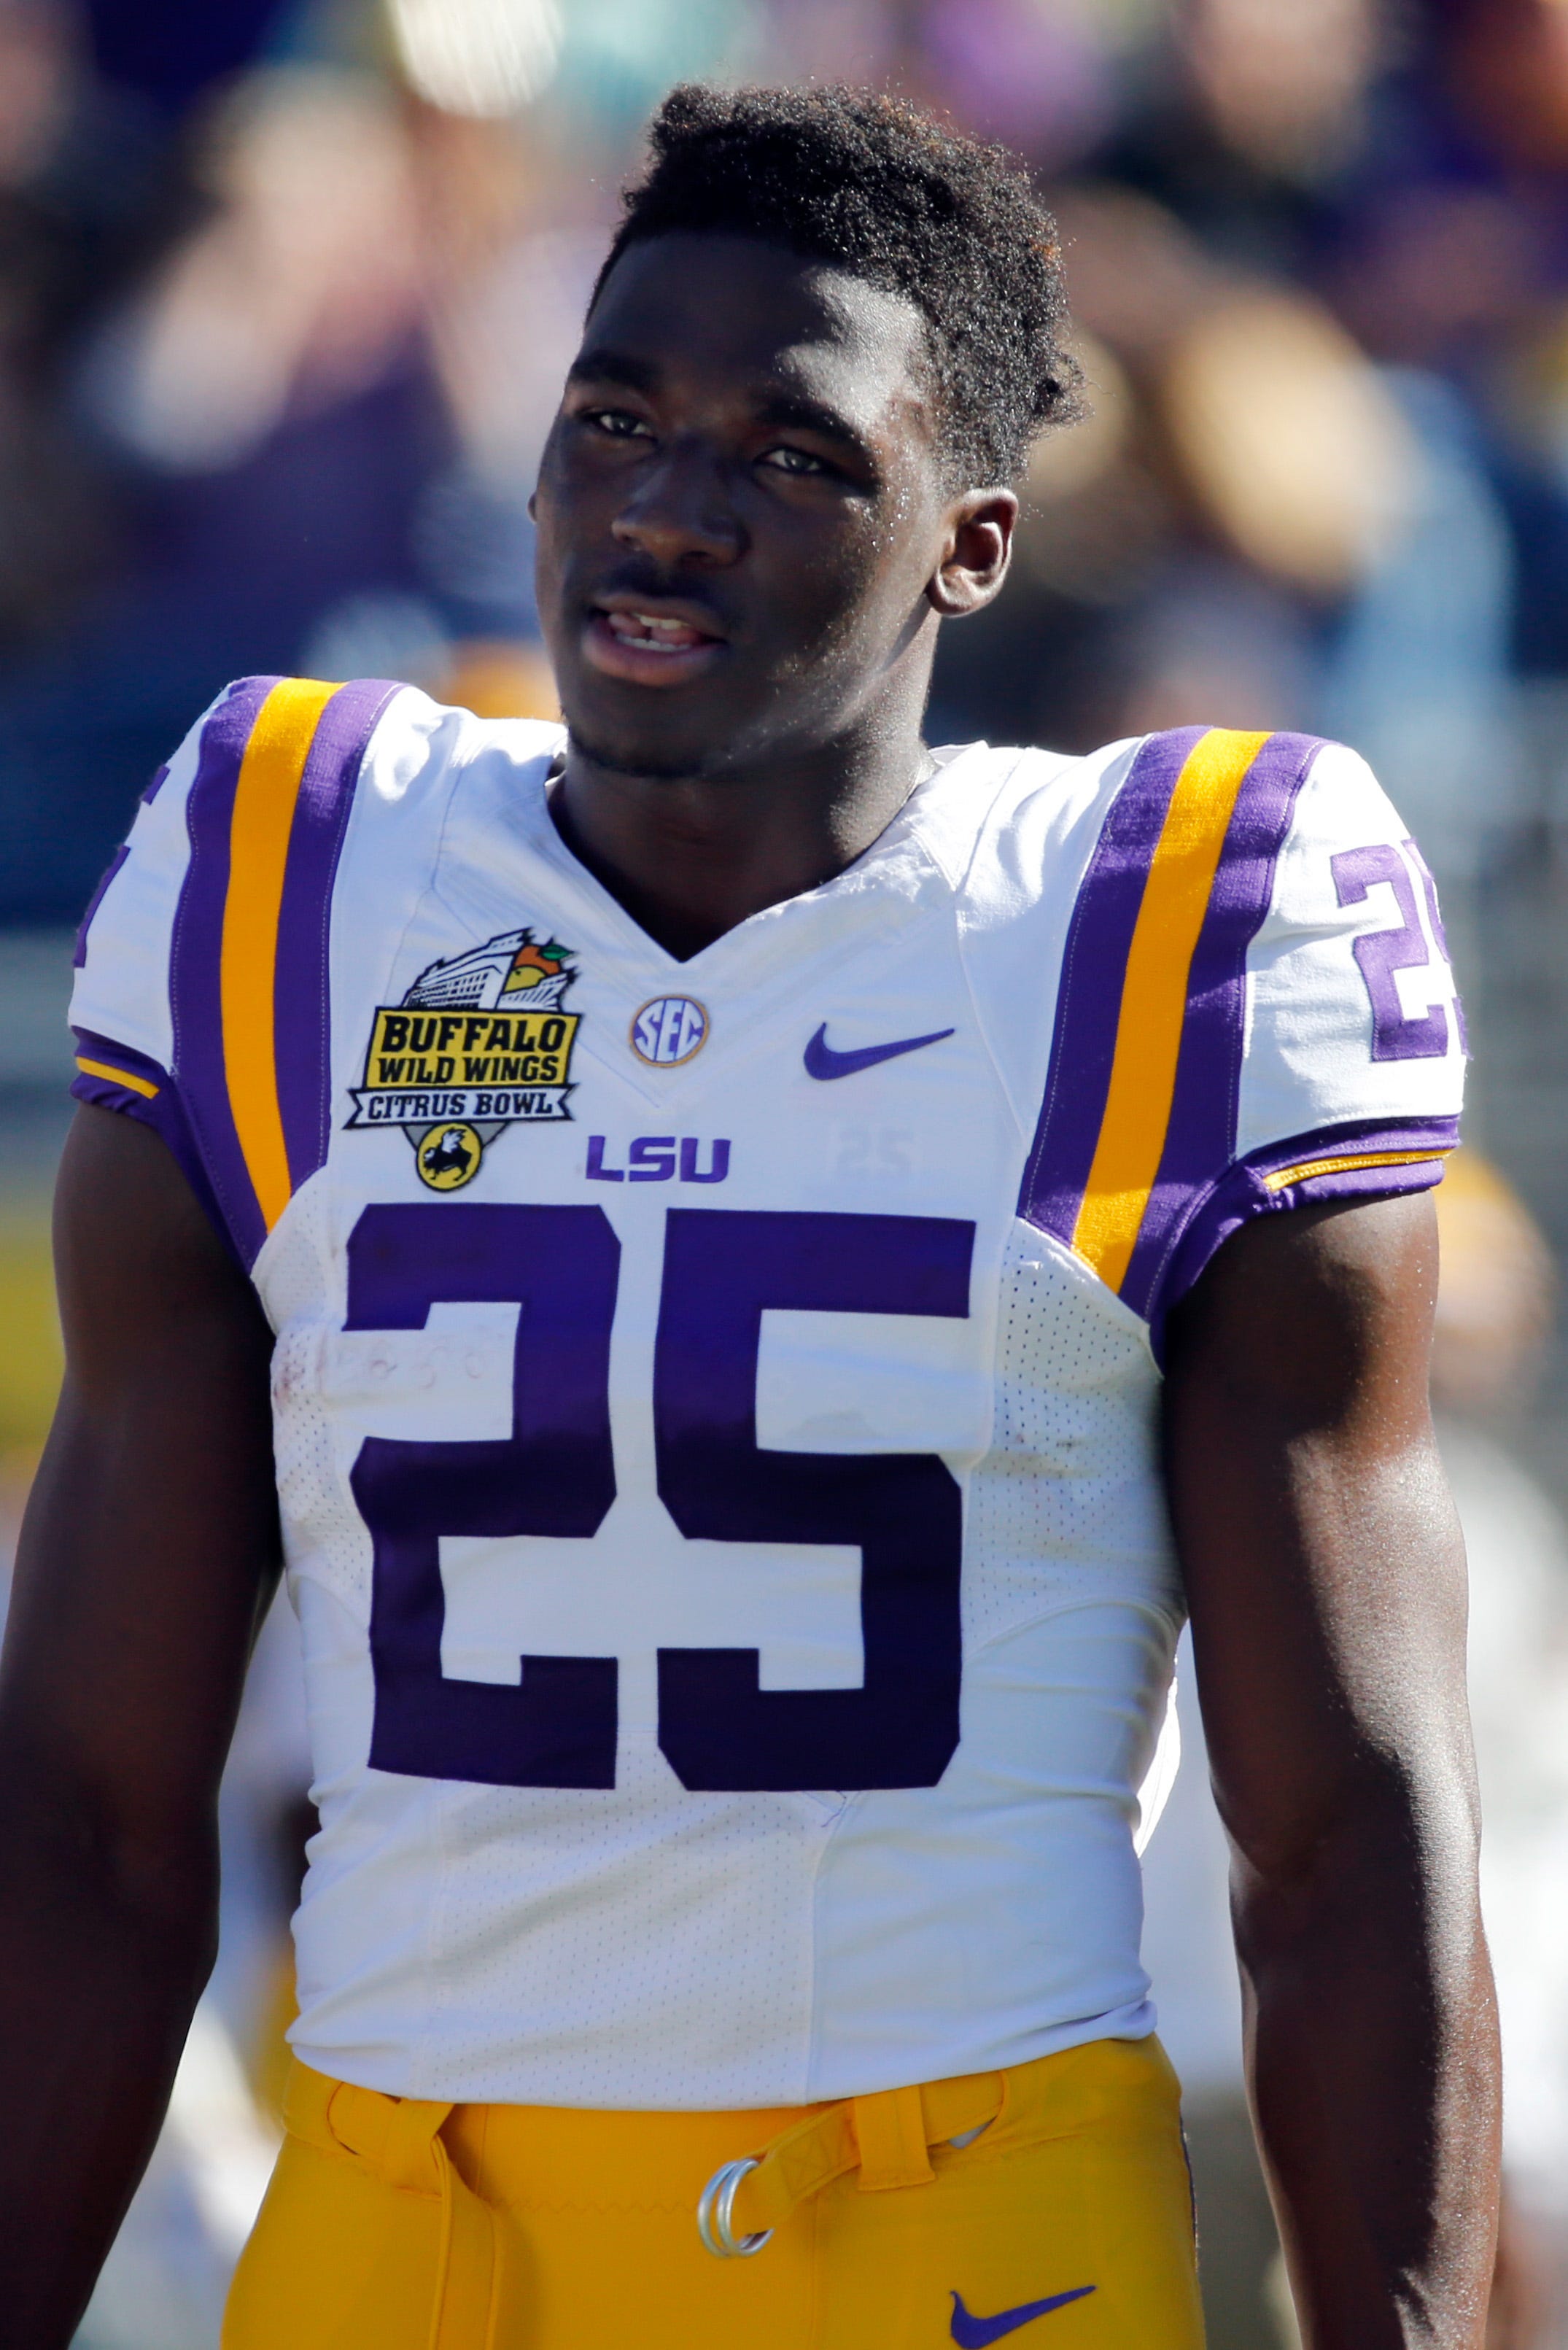 LSU Tigers wide receiver Drake Davis admitted punching a tennis player.